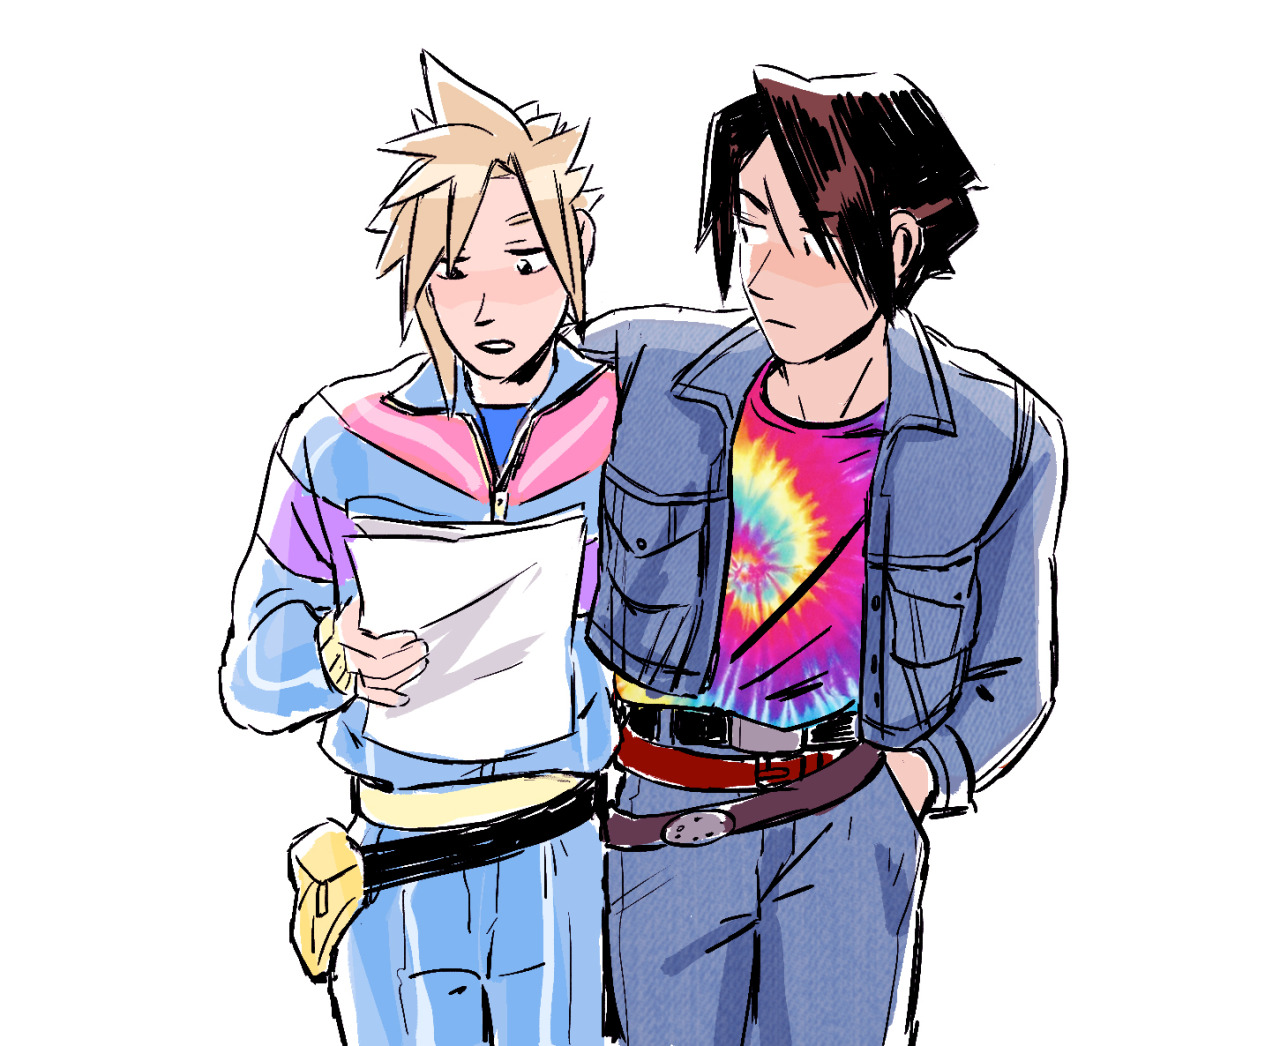 liverpops:  THEY WERE STILL TEENS IN THE 90S AND THEY LIVED THROUGH THIS FASHION